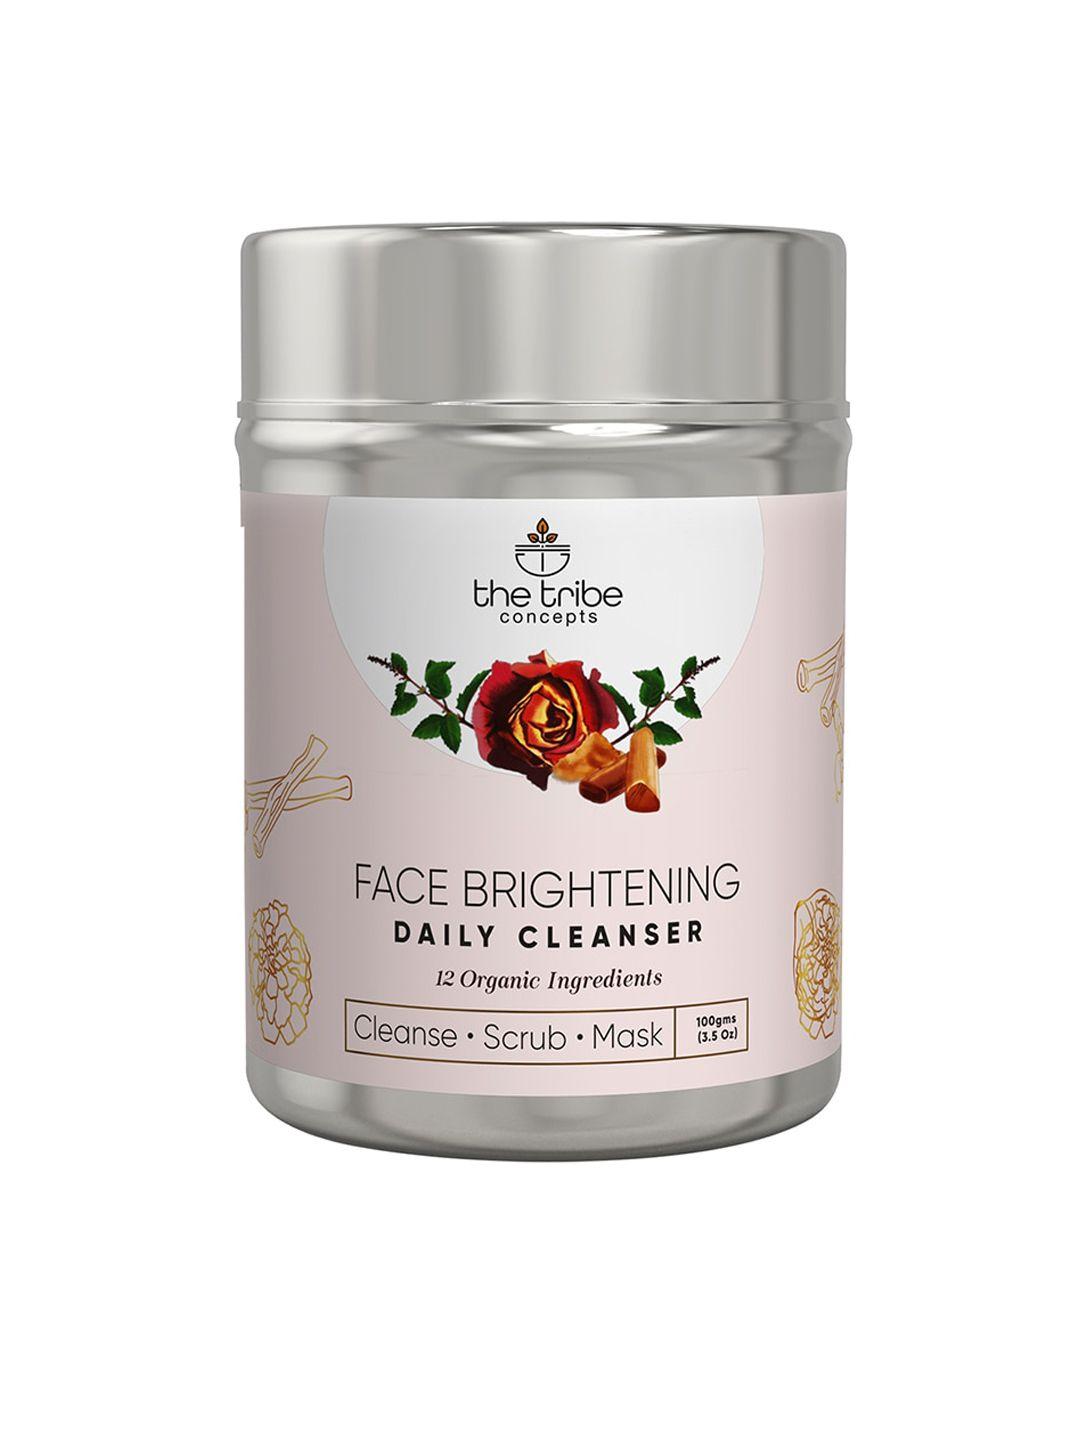 the tribe concepts 12 organic ingredients face brightening daily cleanser 100gm